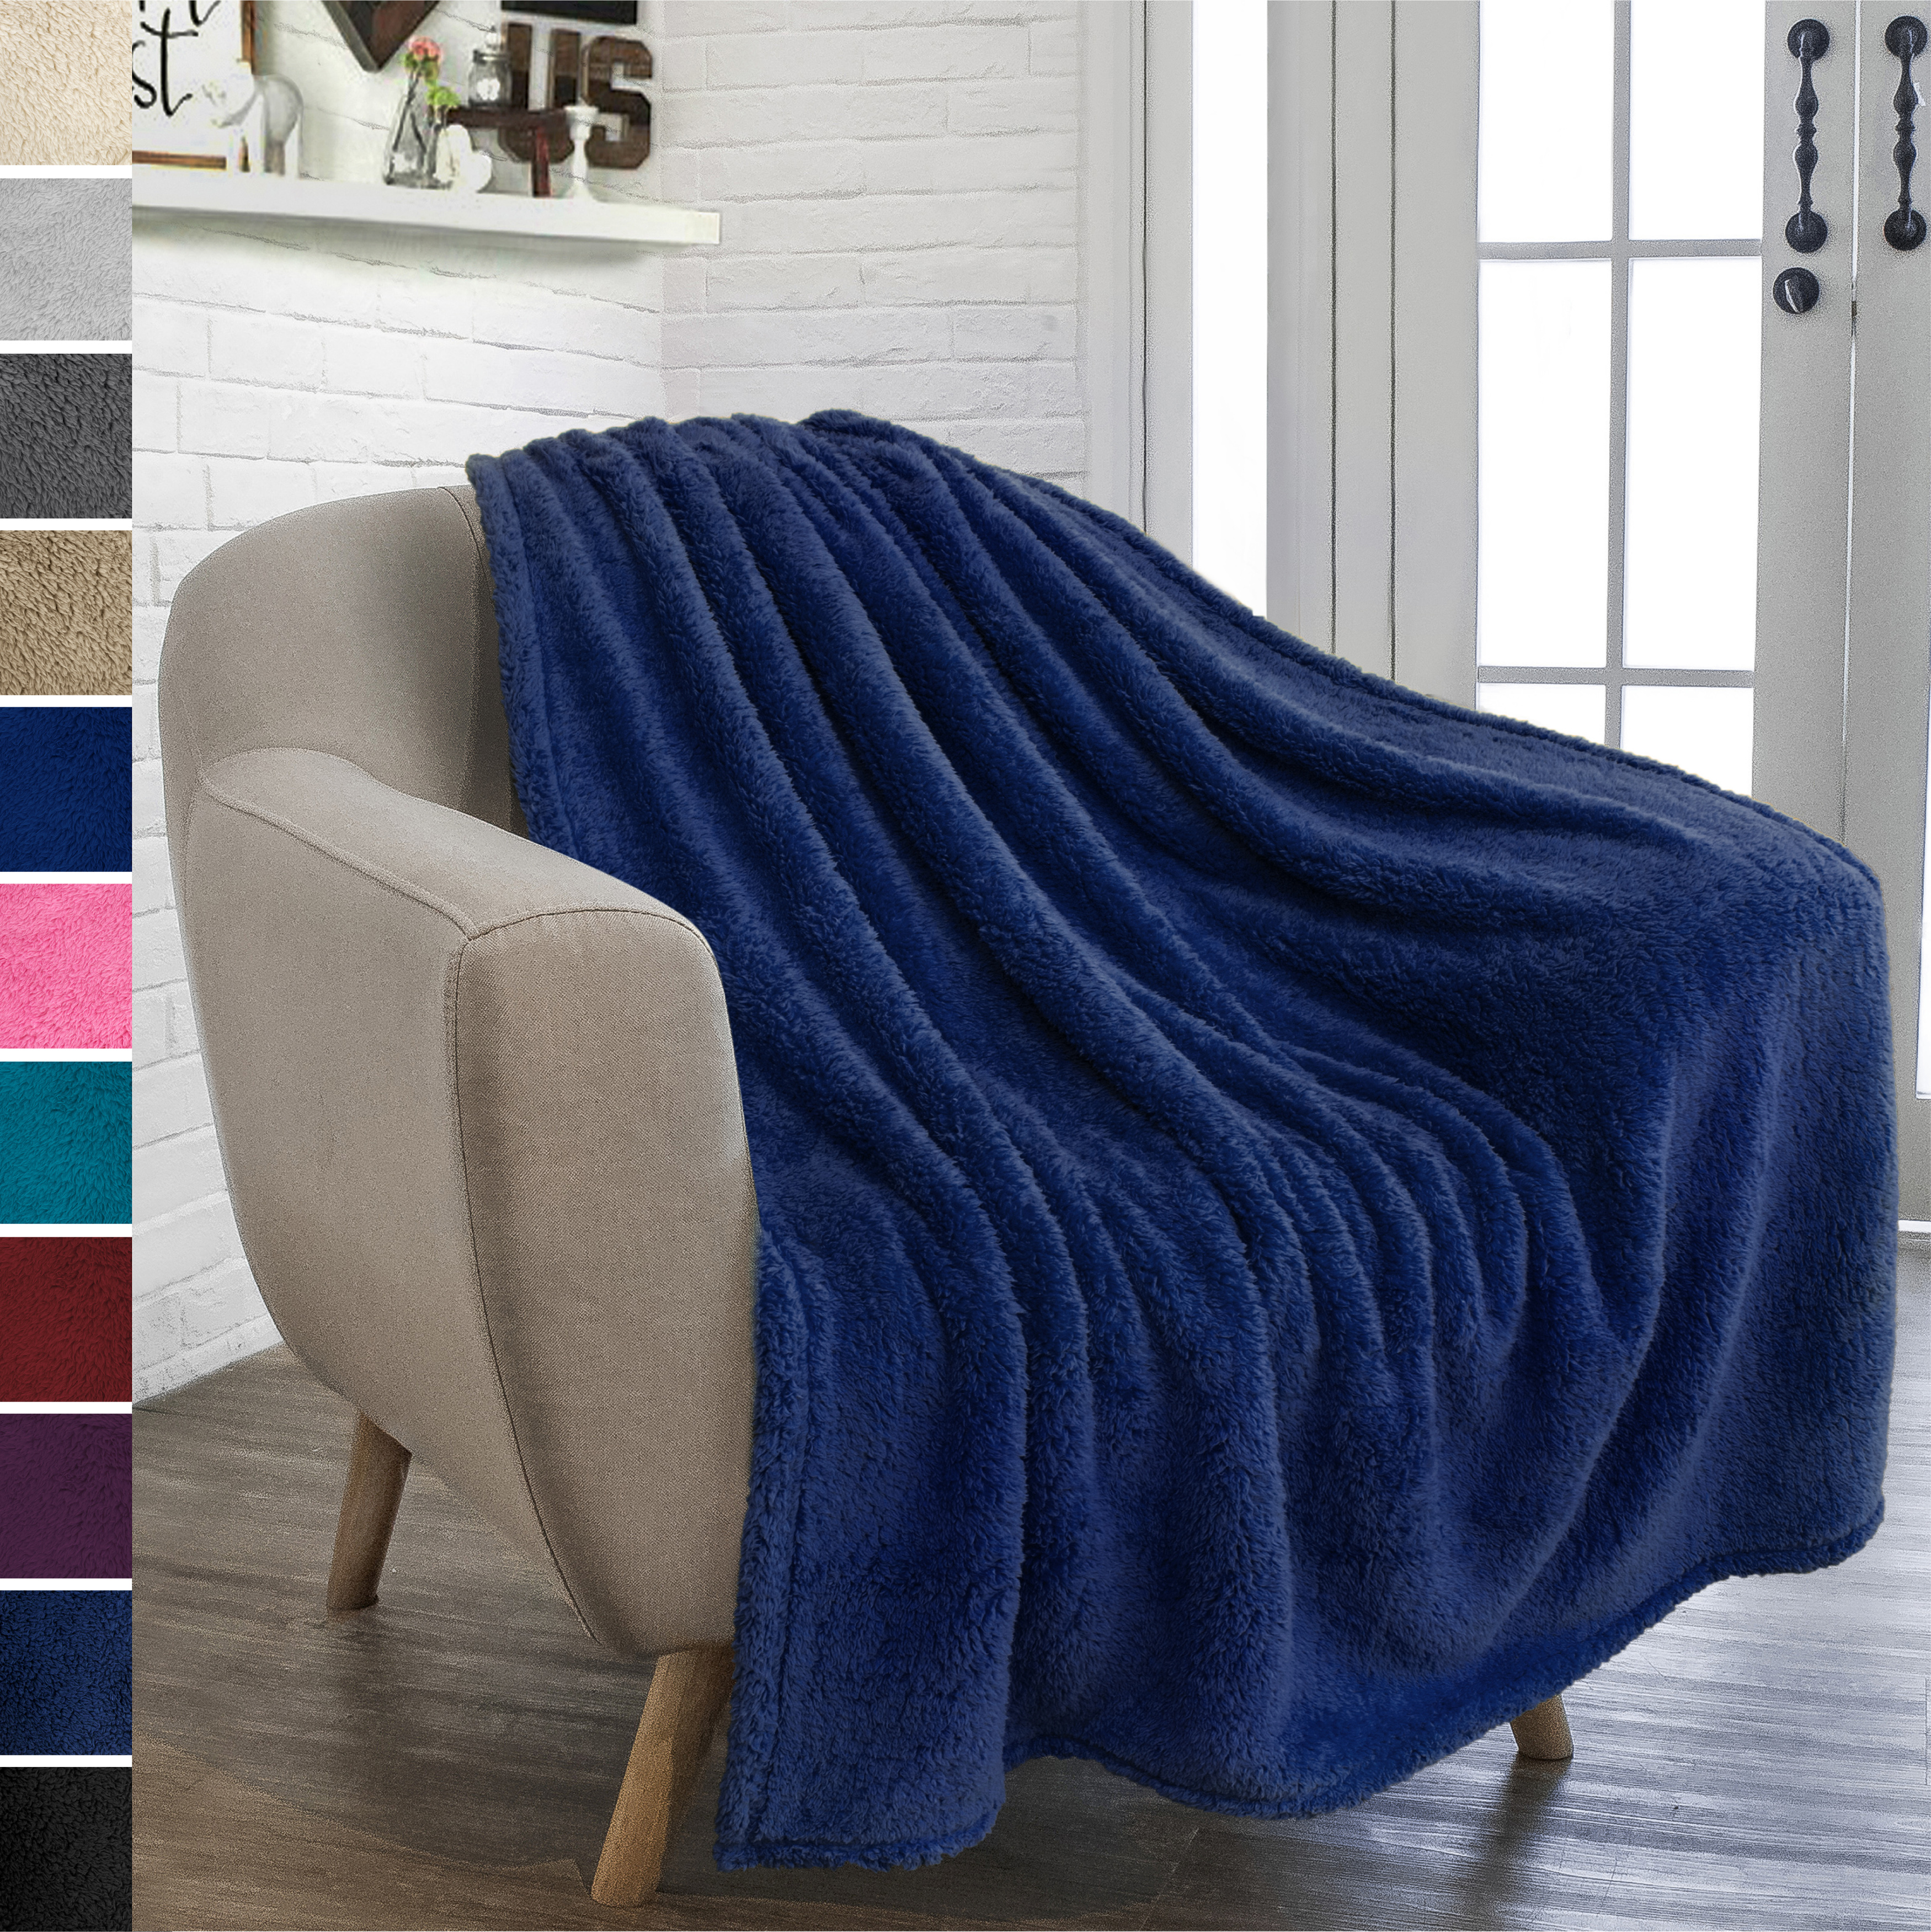 Blue Soft Sherpa Faux Fur Blankets for Sofa Couch Bed Fleece Throw Blanket Cozy Warm Throws for Kids Adult 50x60 inch 